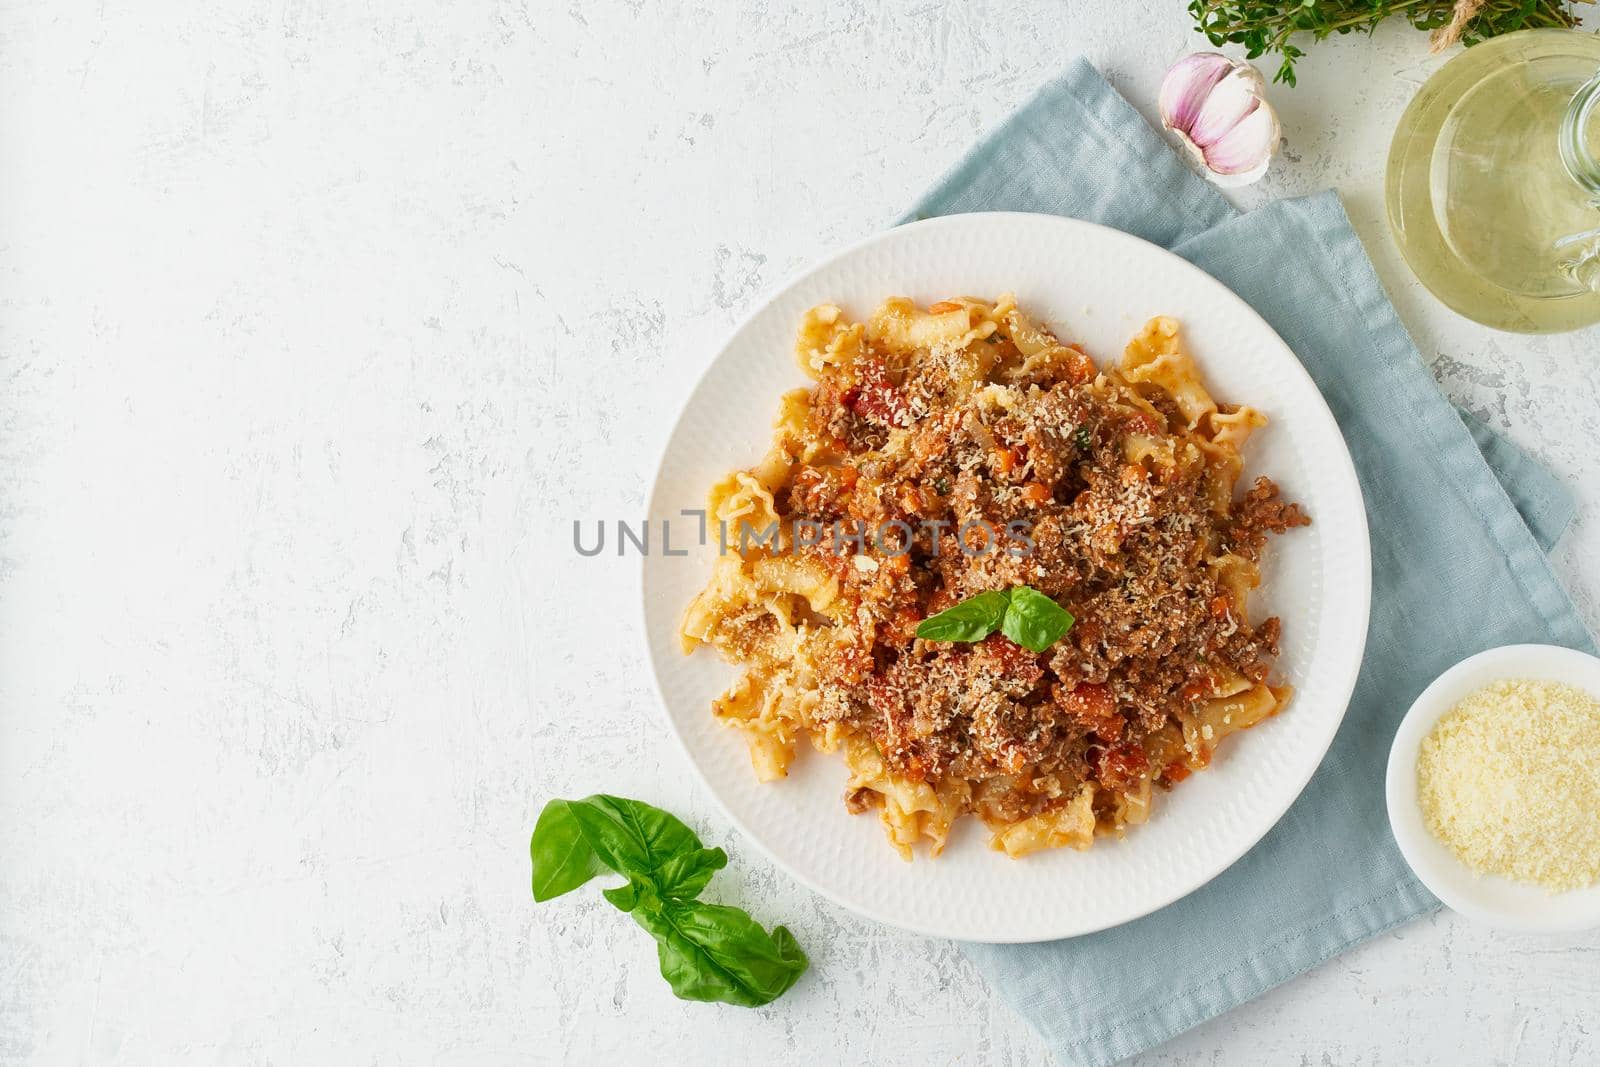 Pasta Bolognese campanelle with mincemeat and tomato sauce, parmesan cheese, basil. Italian dinner, white table. Top view, close up, copy space